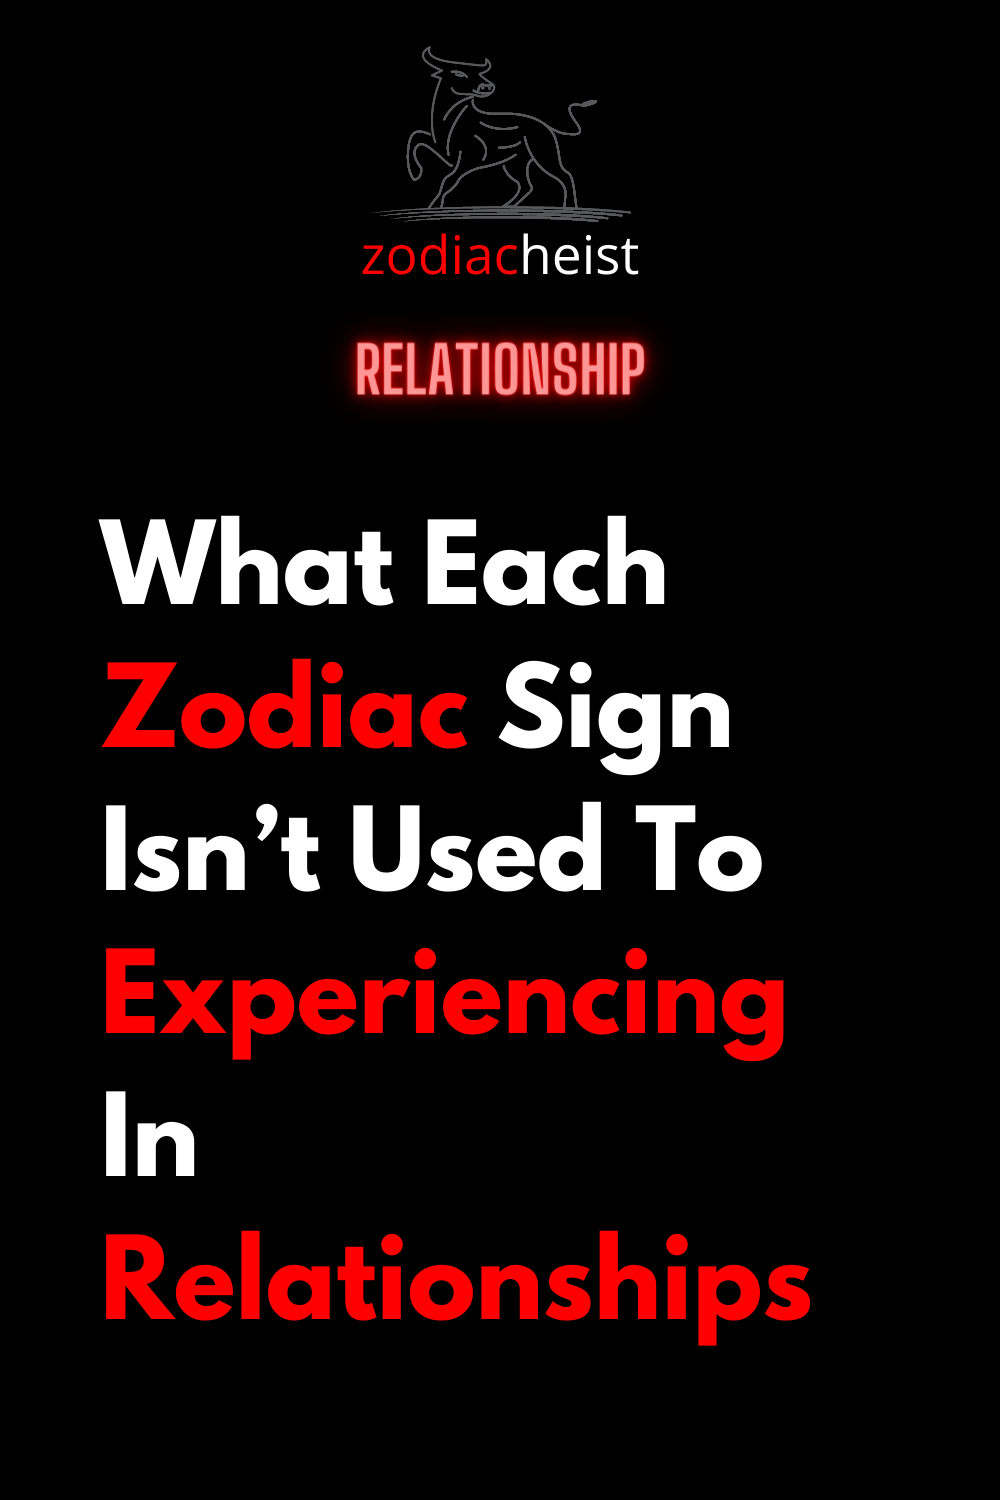 What Each Zodiac Sign Isn’t Used To Experiencing In Relationships